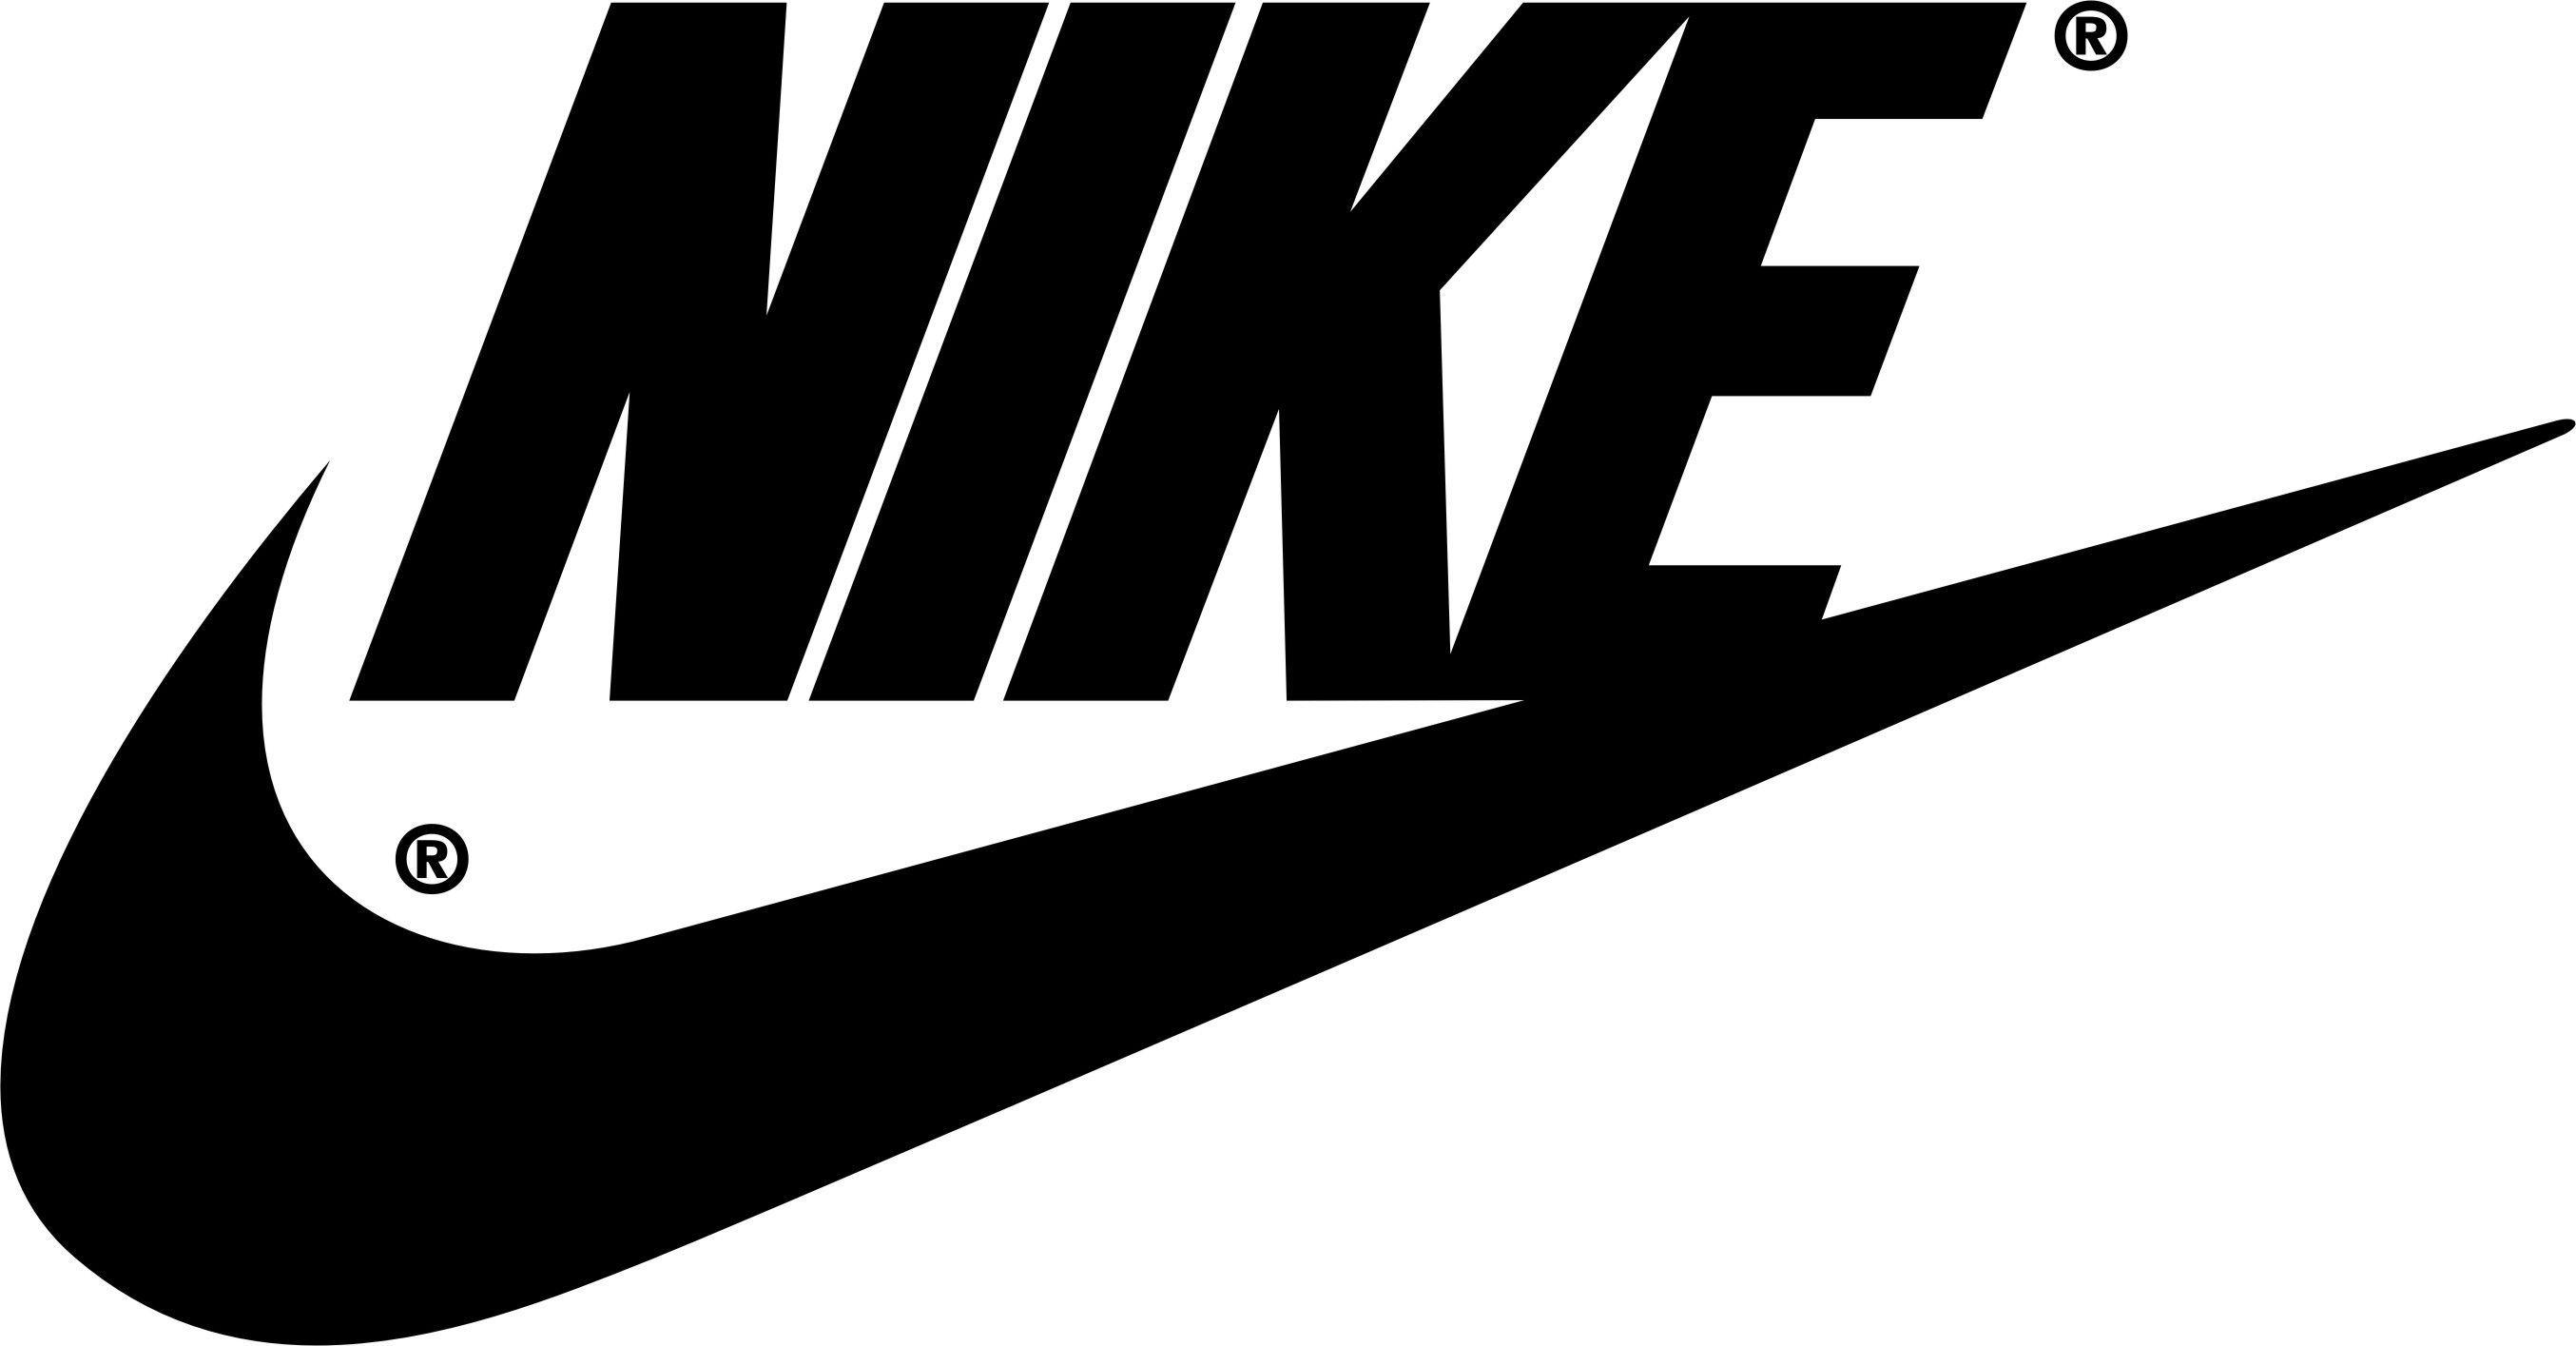 Most Popular Nike Logo - The 10 Most Expensive Logo Designs and Rebranding | 10 Most ...